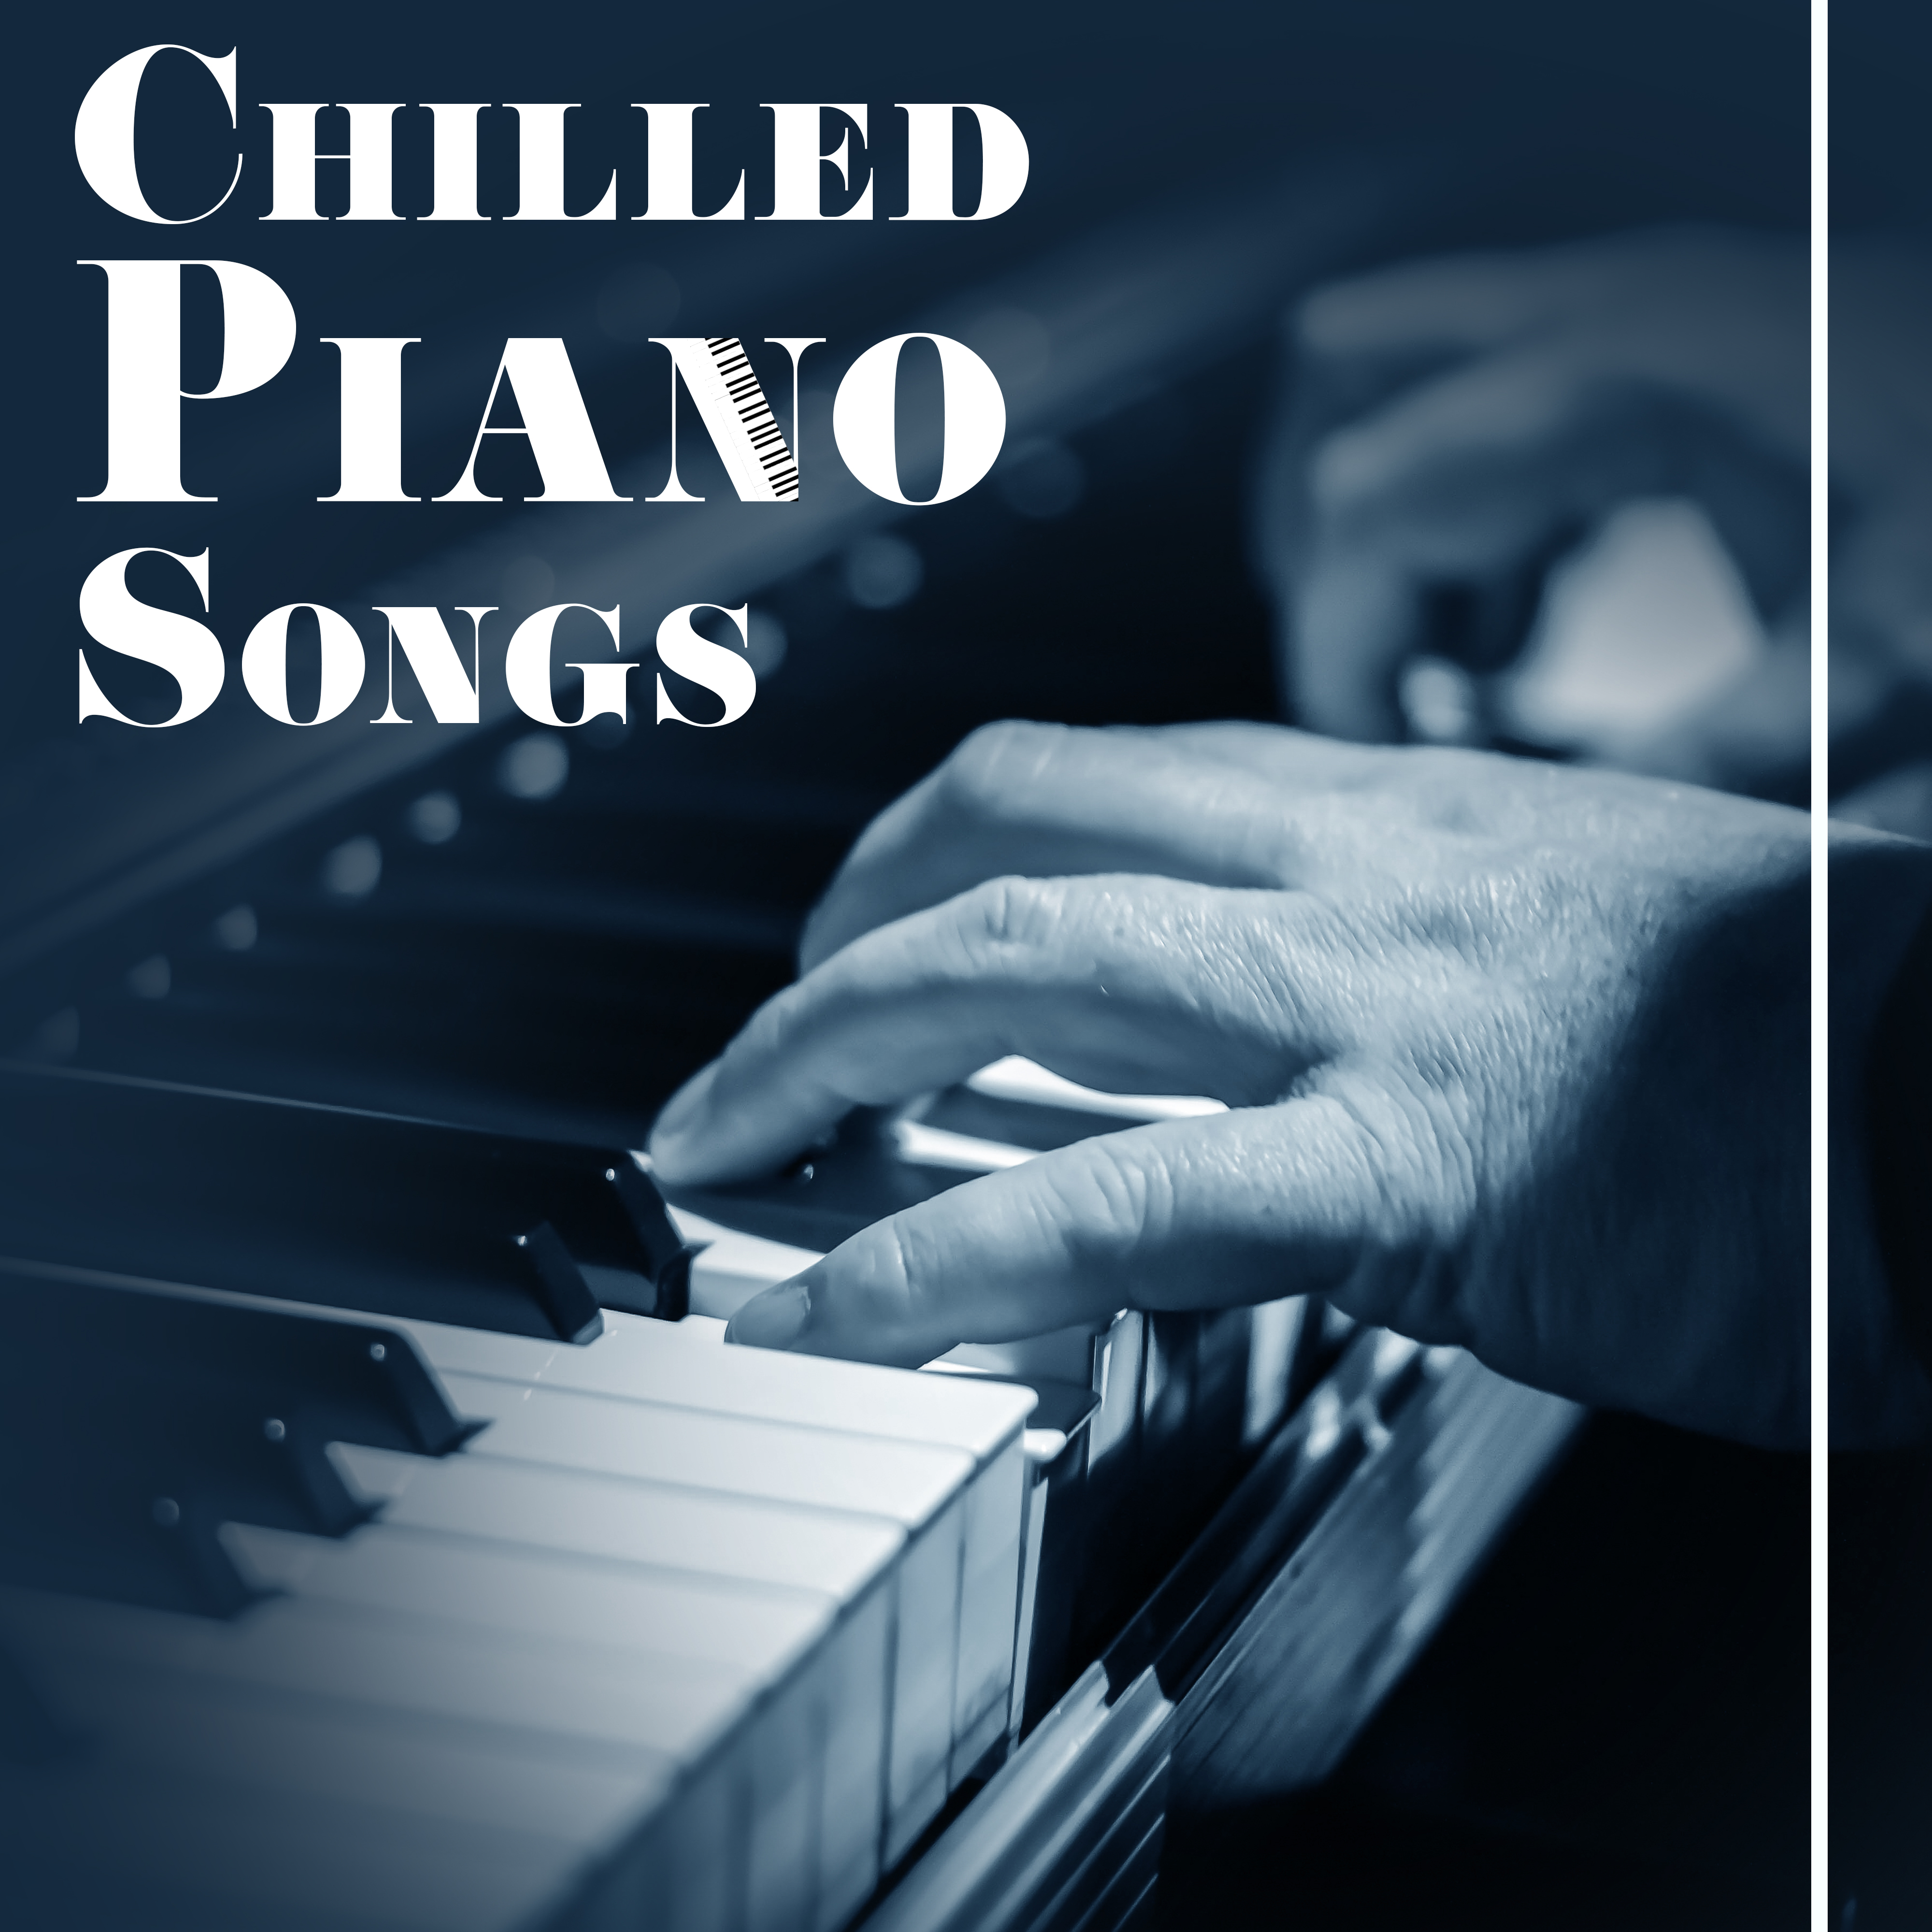 Chilled Piano Songs  Gentle Jazz, Instrumental Music, Calming Jazz Music for Cafe  Jazz Club